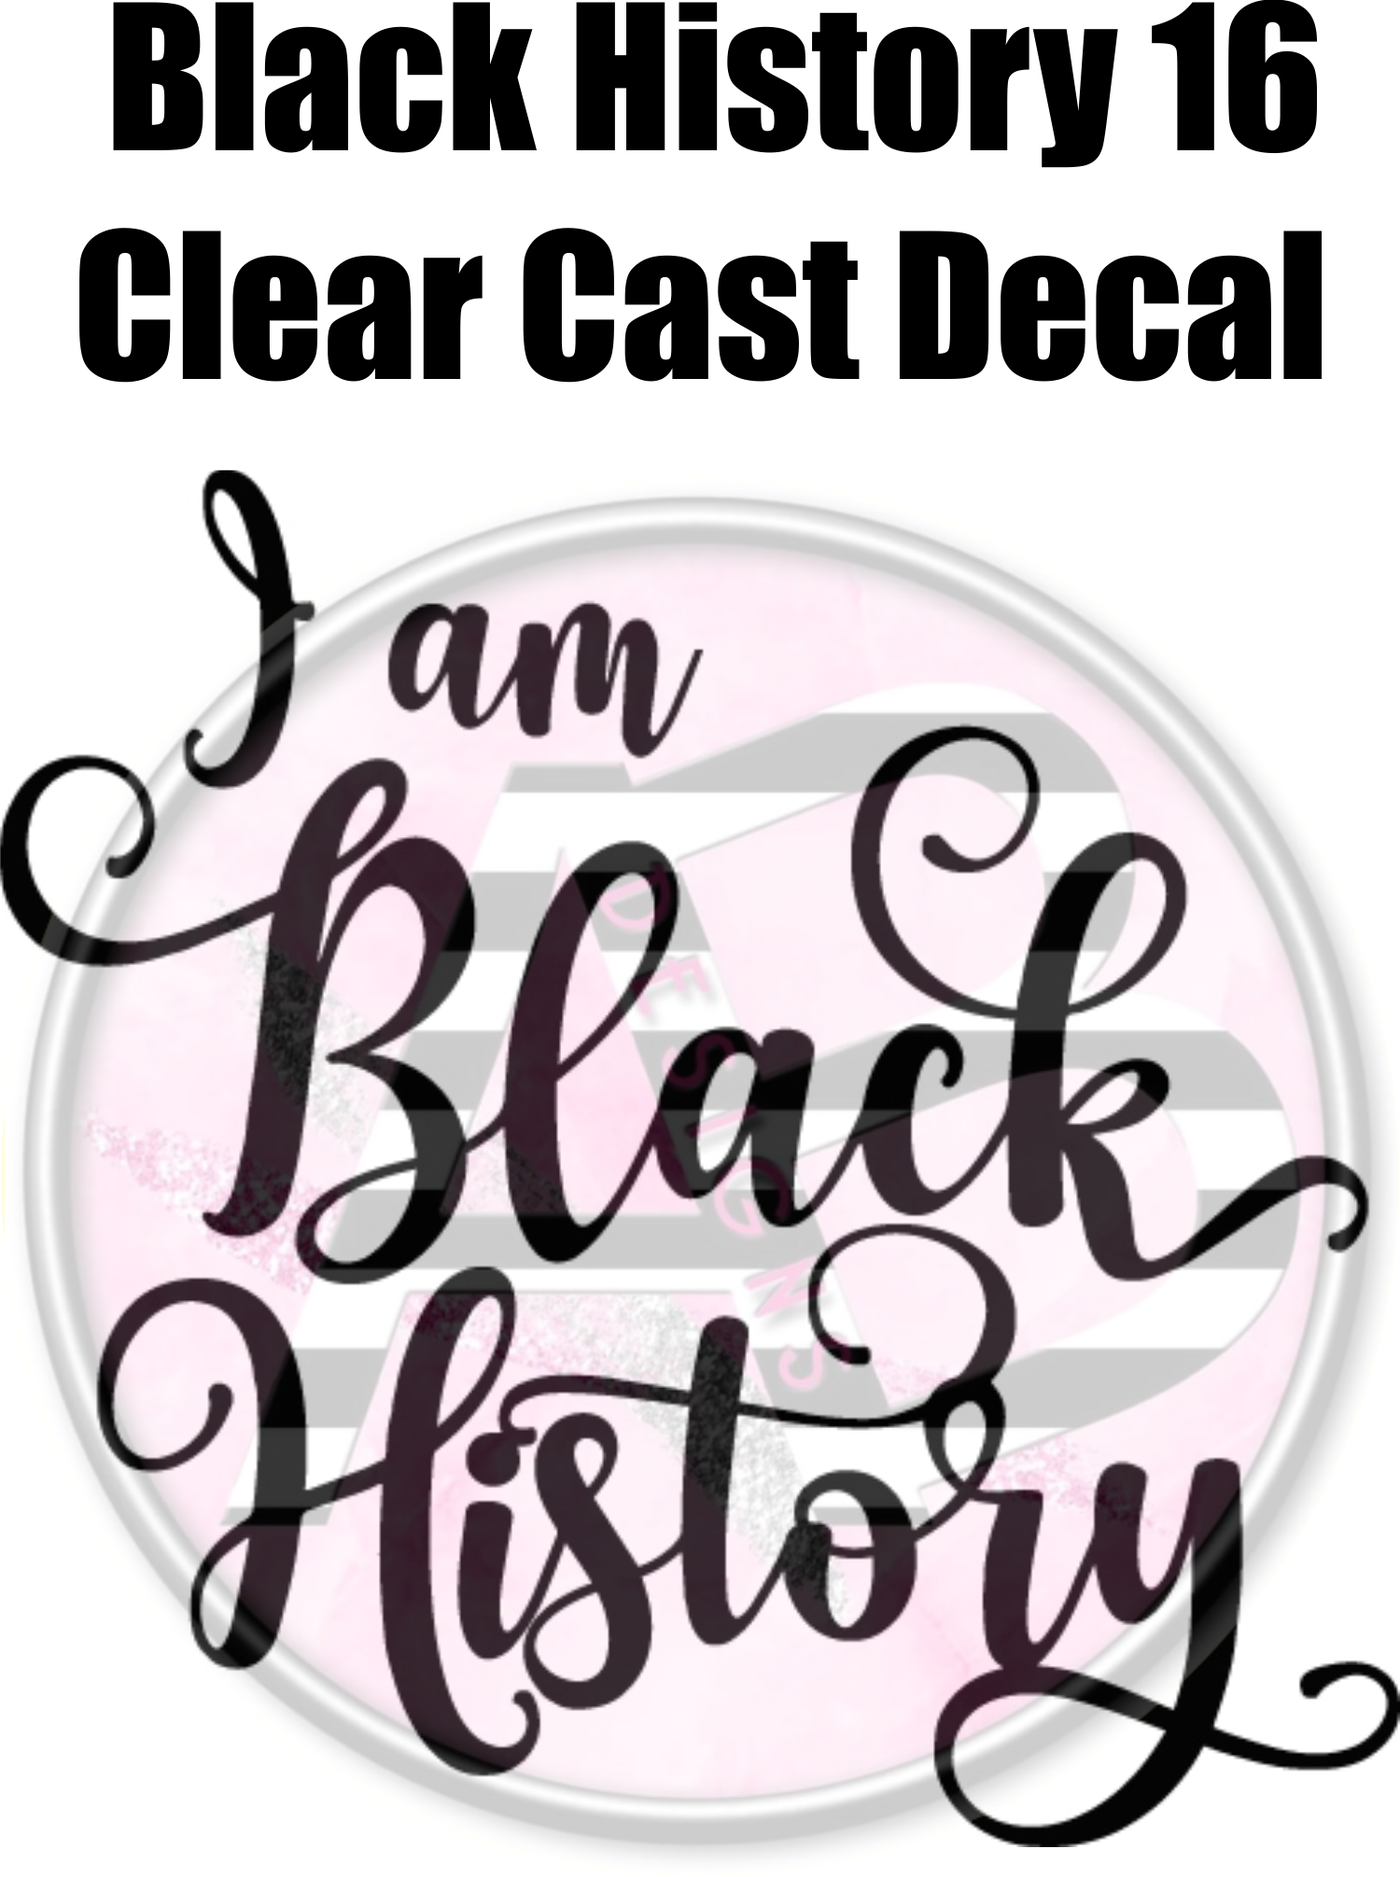 Black History 16 - Clear Cast Decal